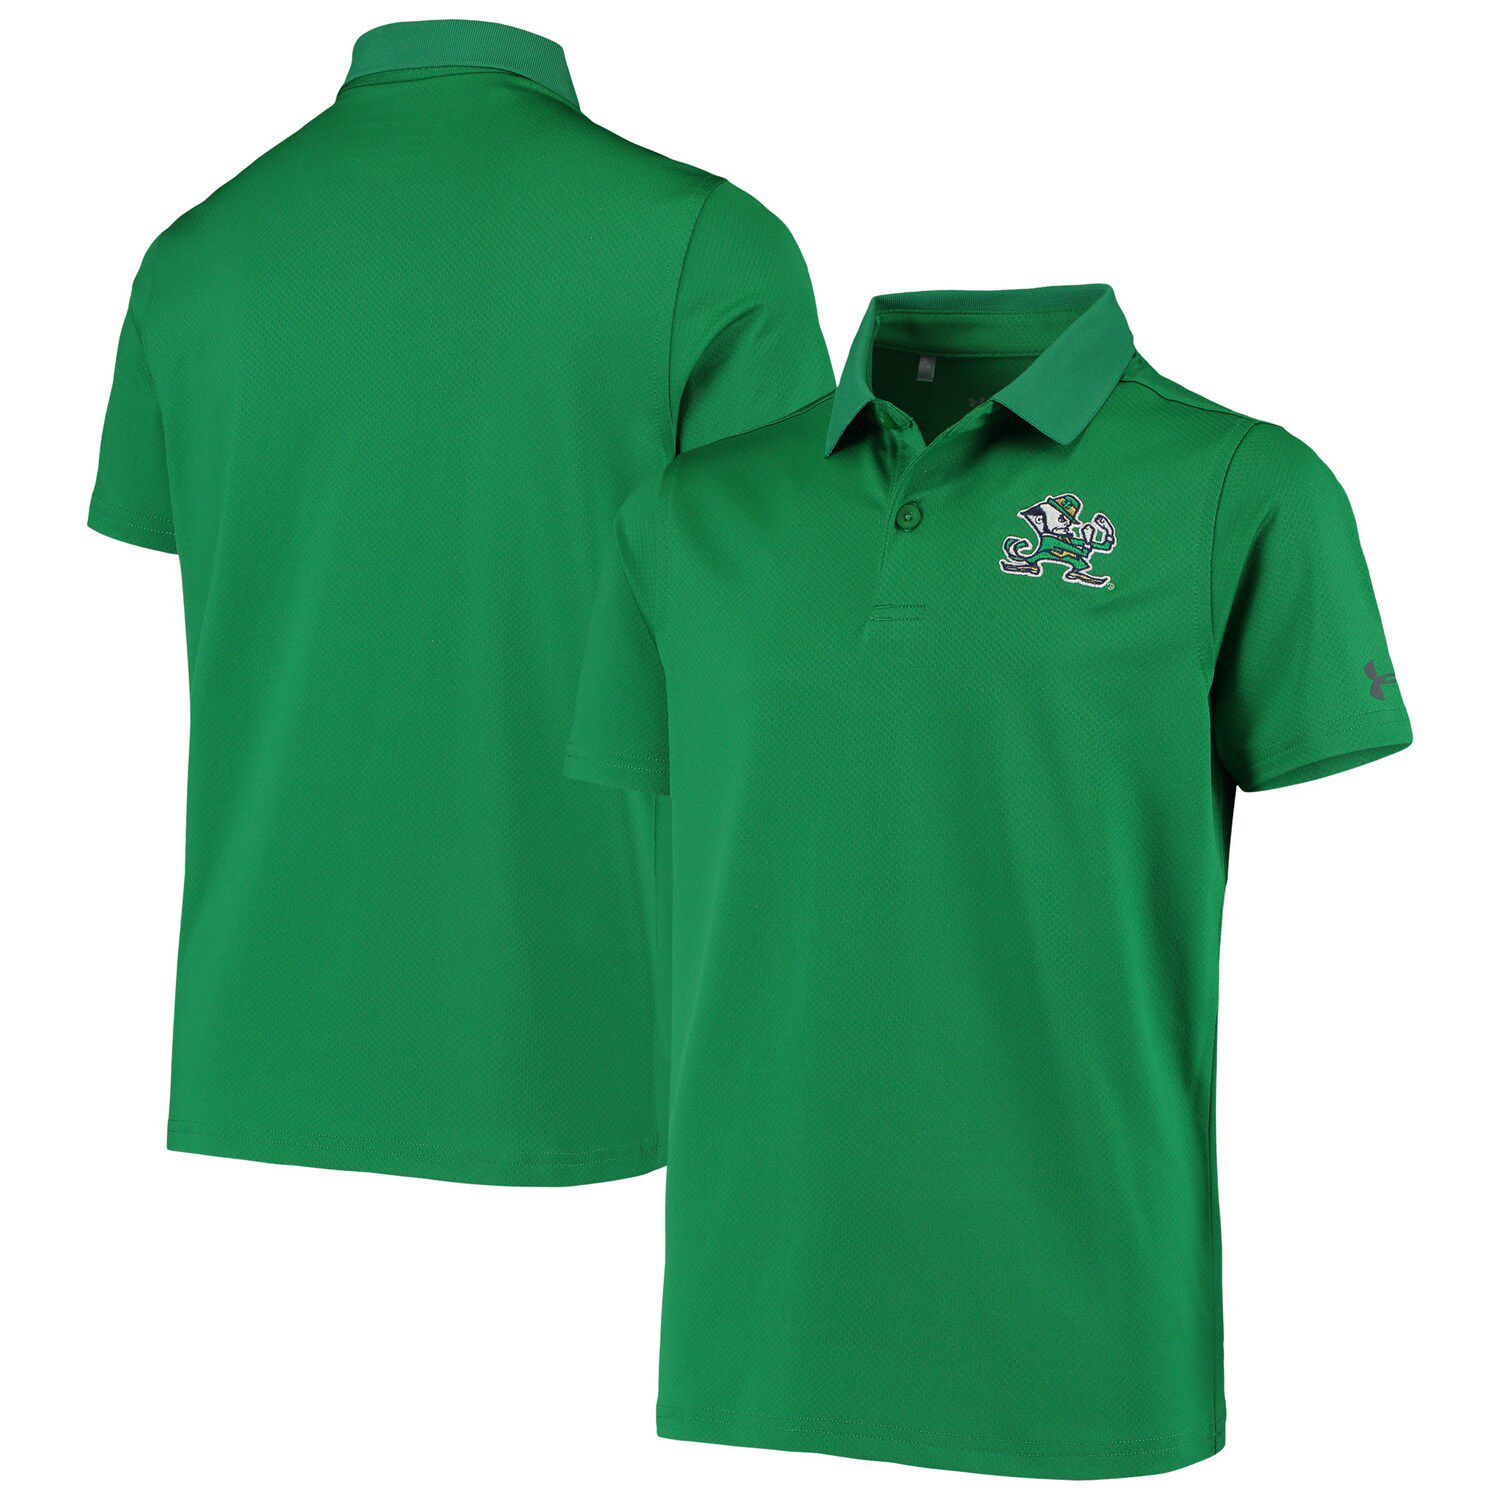 under armour polo youth